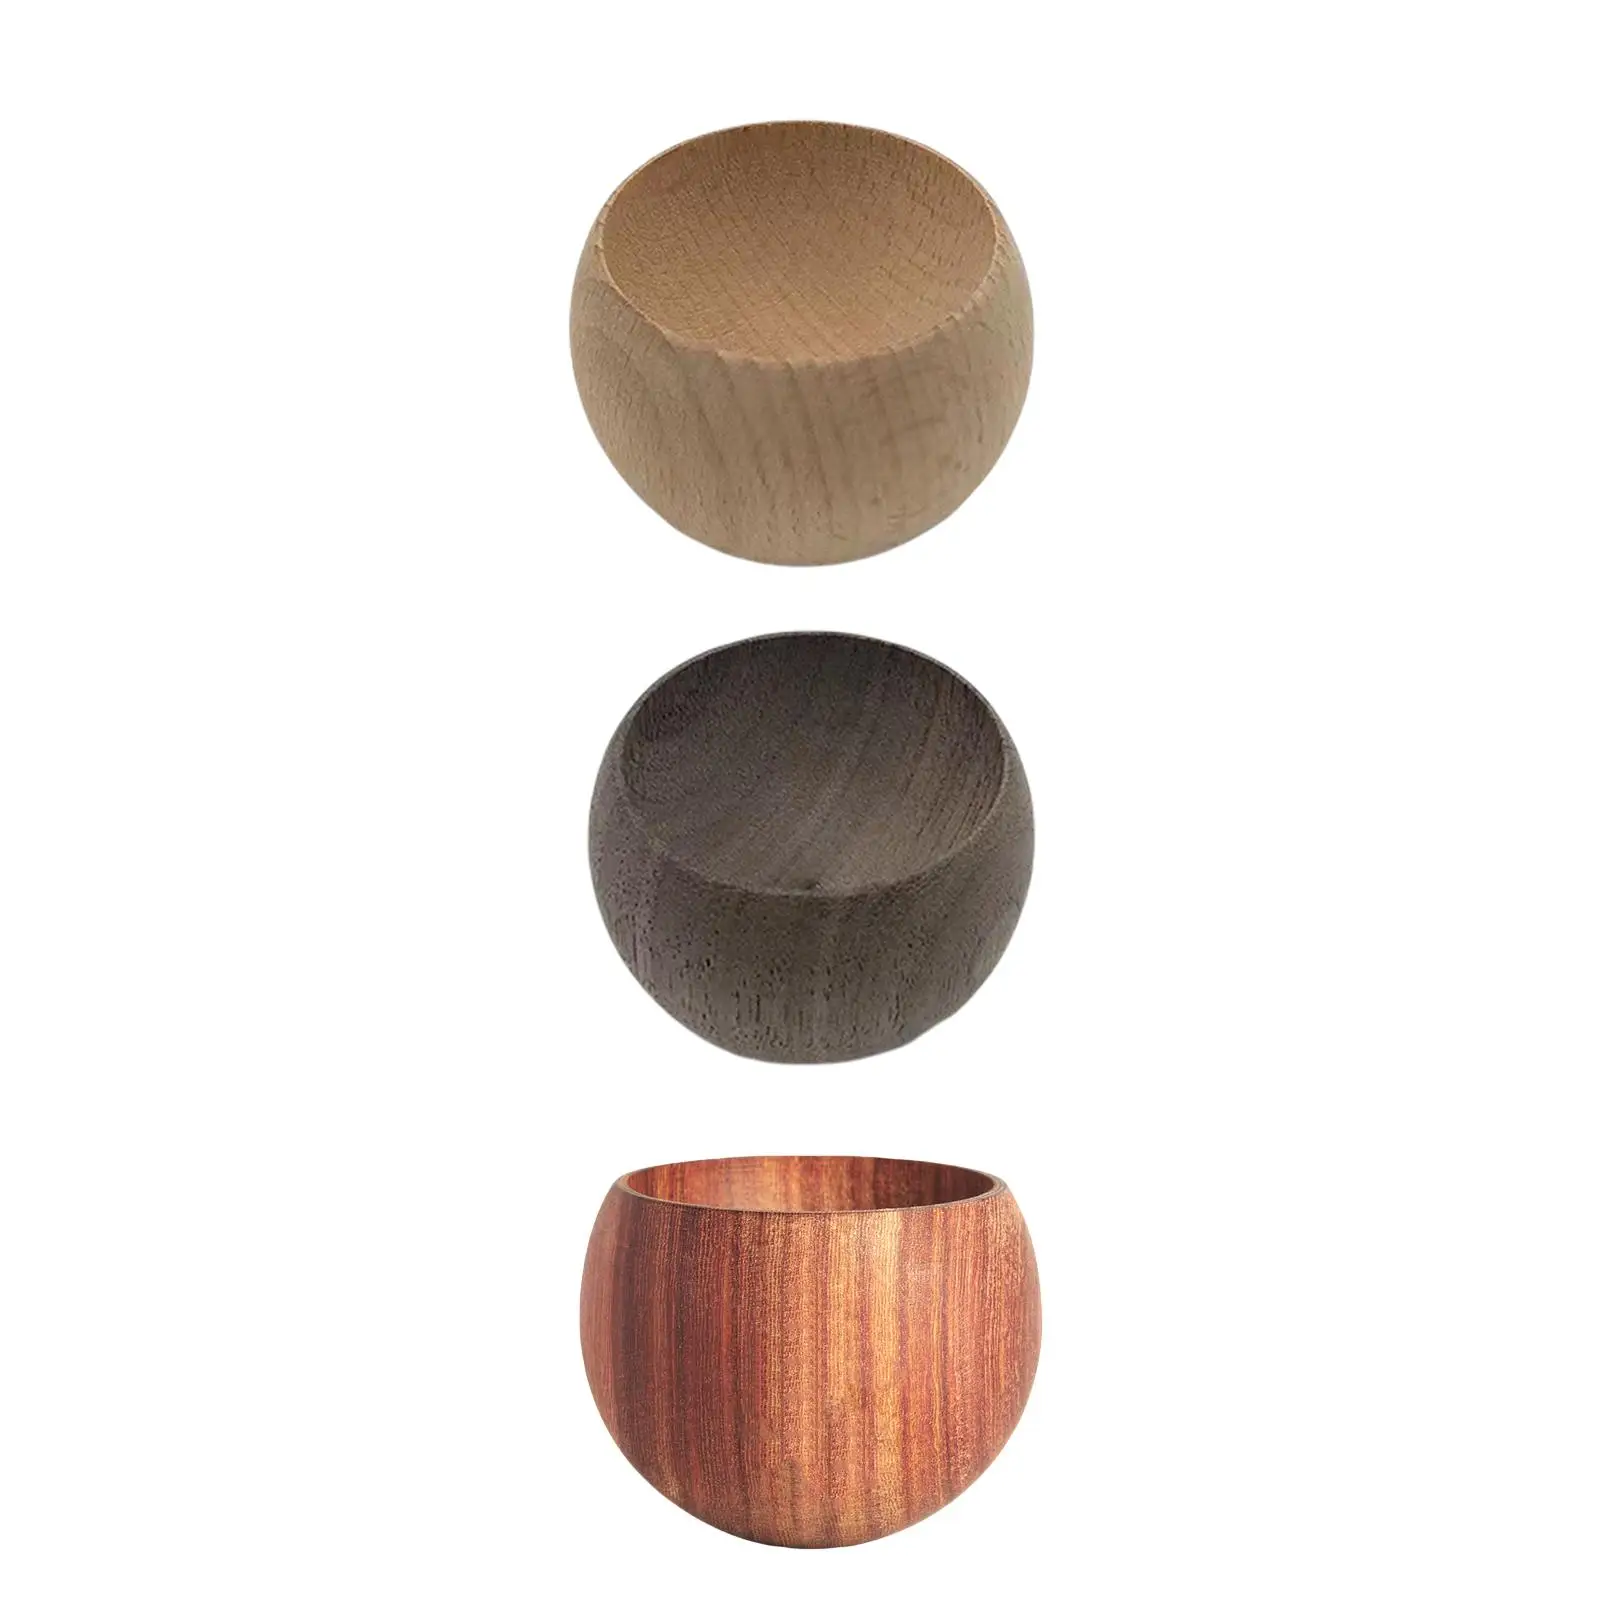 Scent Diffuser Decor Ornament Gifts Portable Round Wooden Car Diffuser for Office Automotive Bookshelf Beauty Salon Living Room